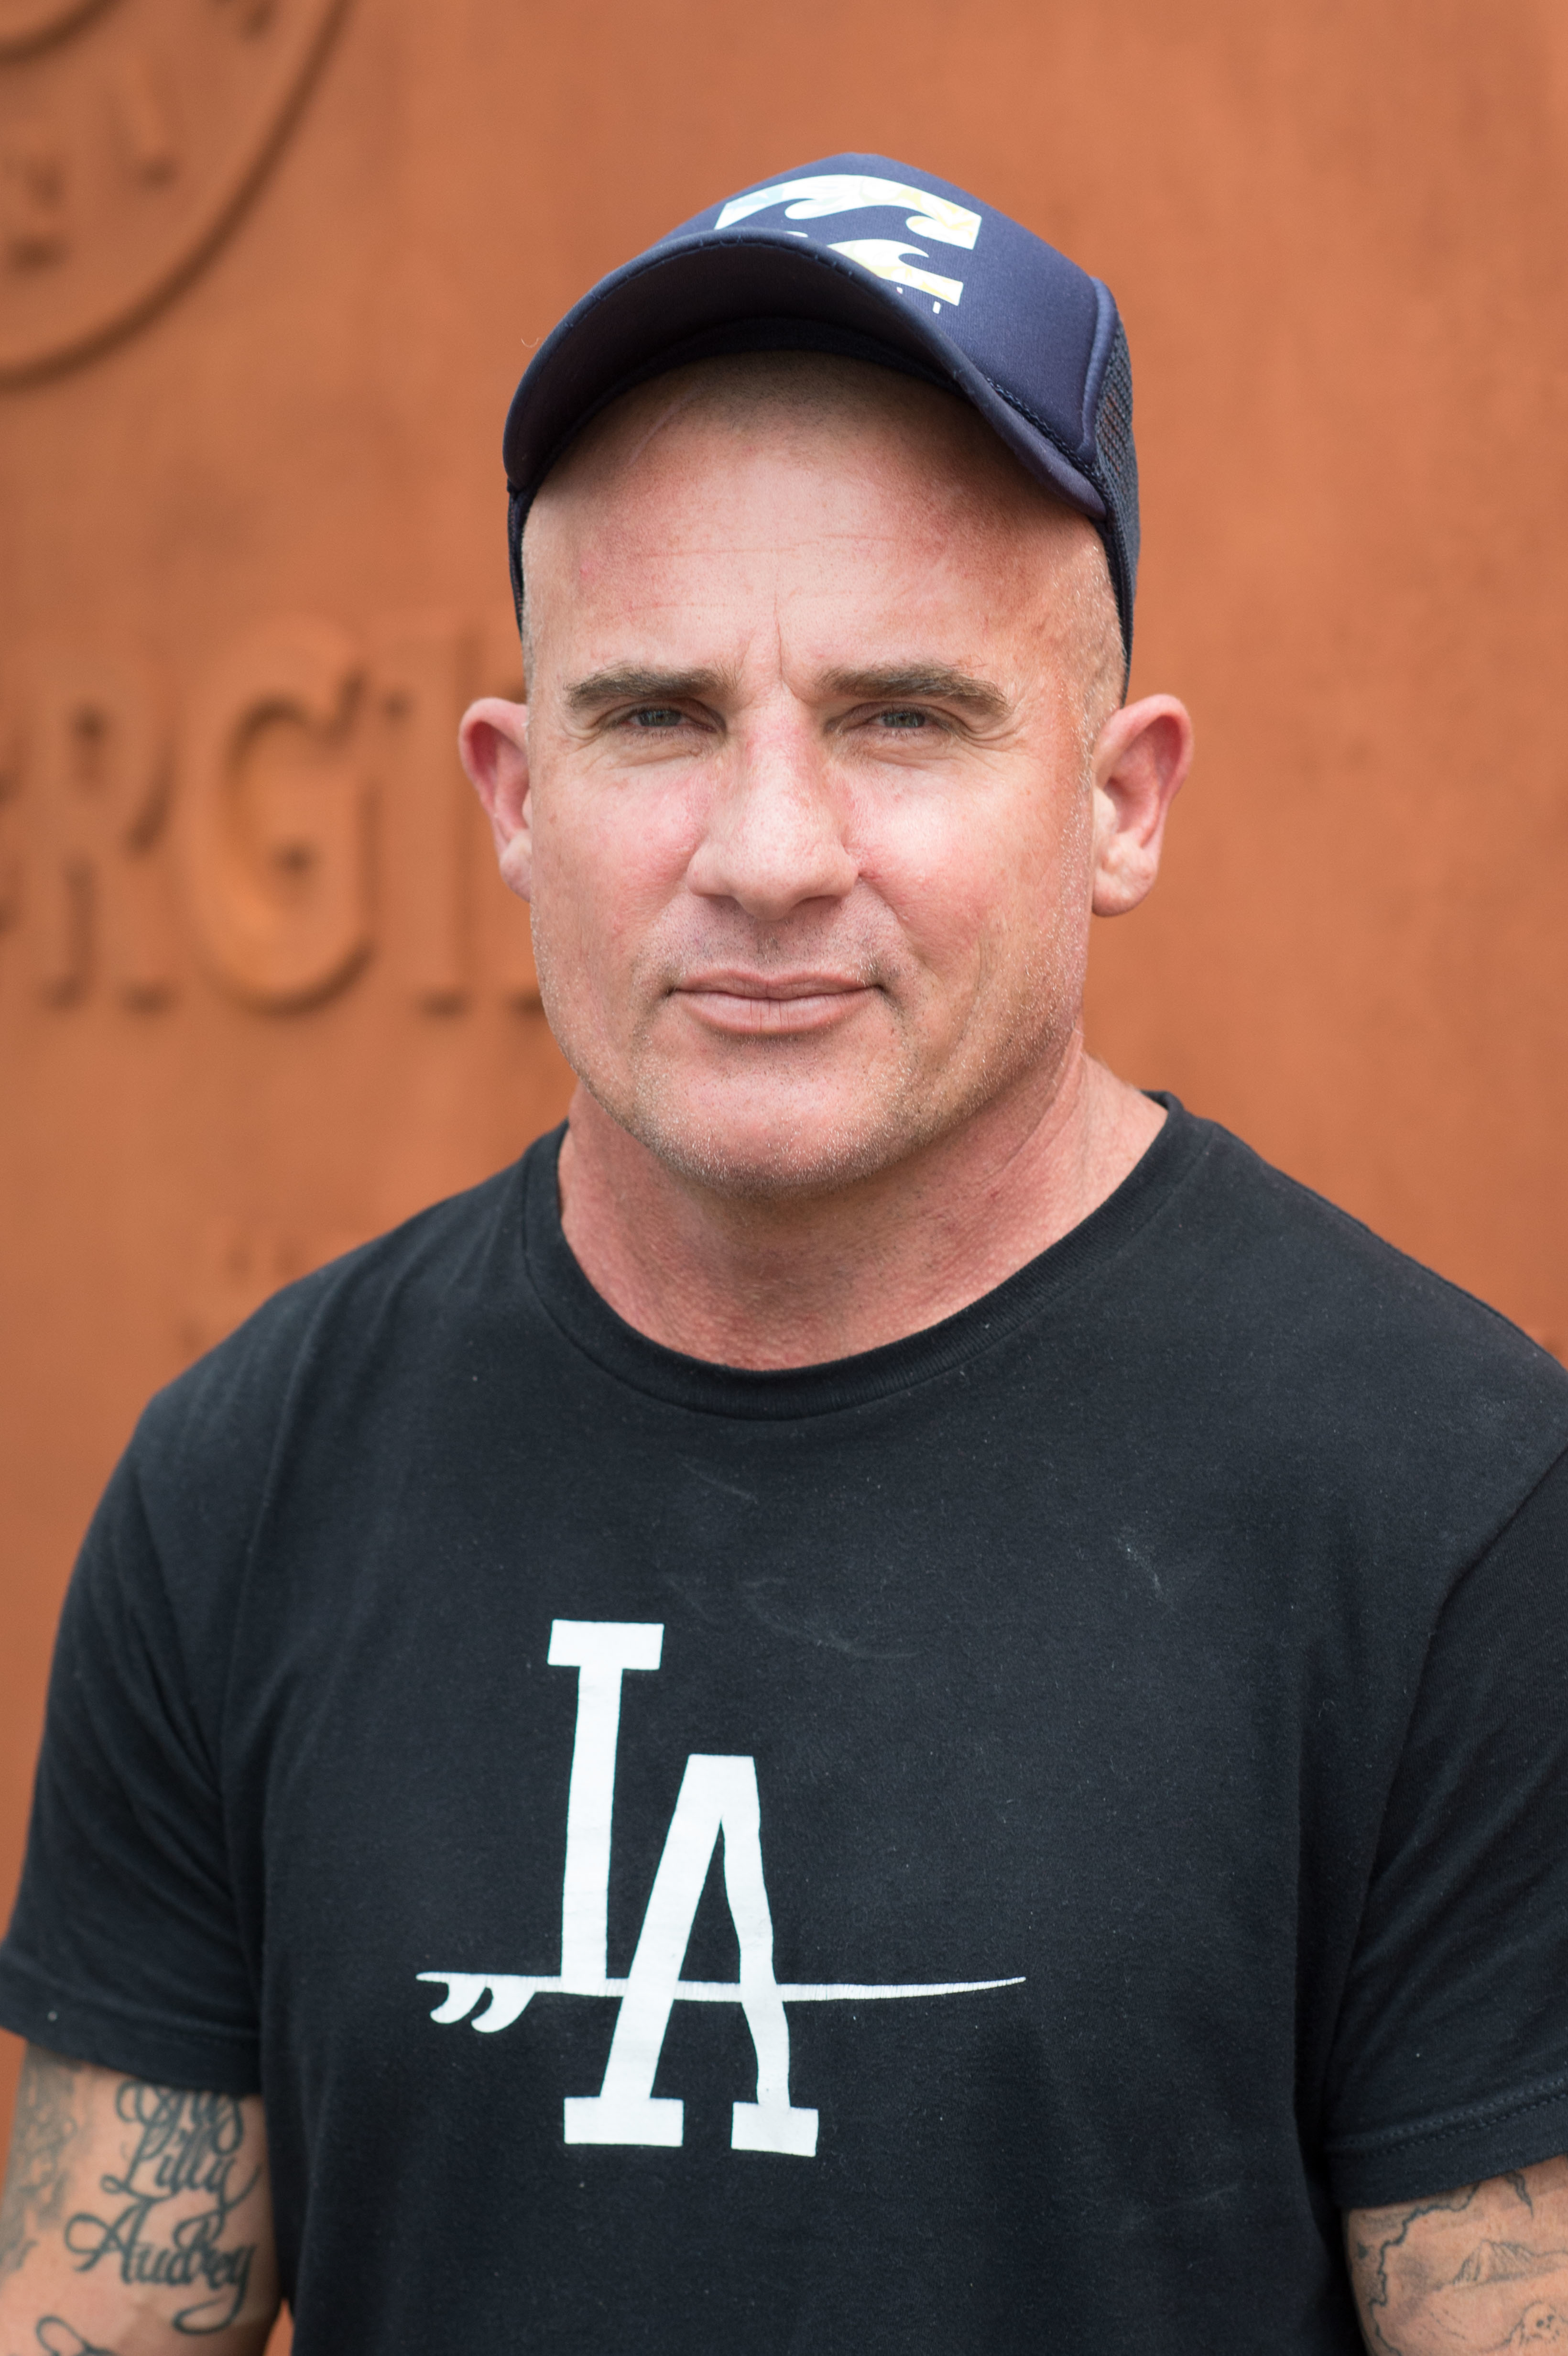 Dominic Purcell in a black t-shirt and cap, standing in front of a textured backdrop